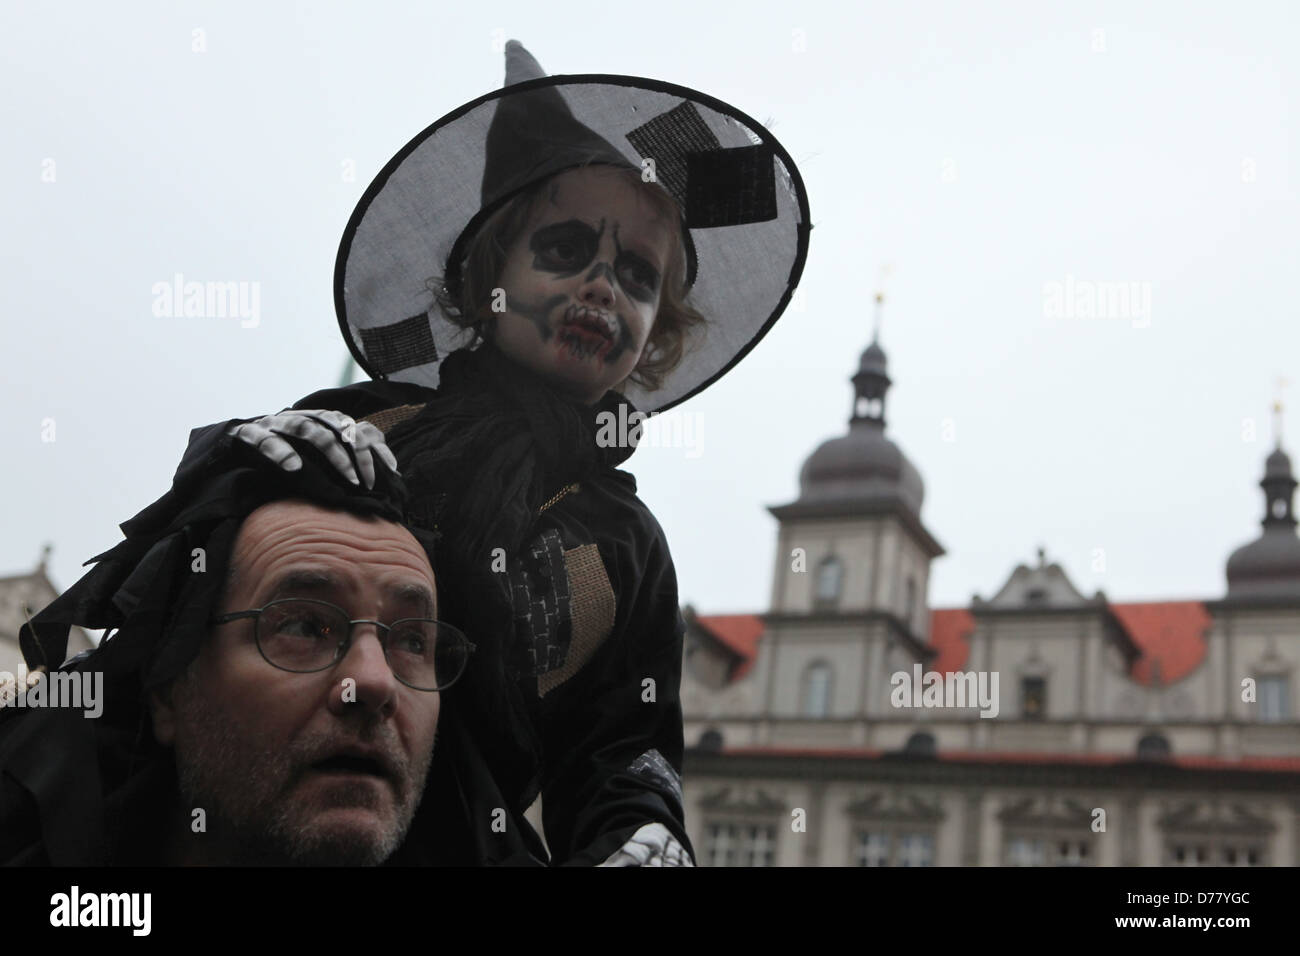 Celebration of the Witches' Night or the Burning of the Witches in Prague, Czech Republic, on April 30, 2013. Stock Photo